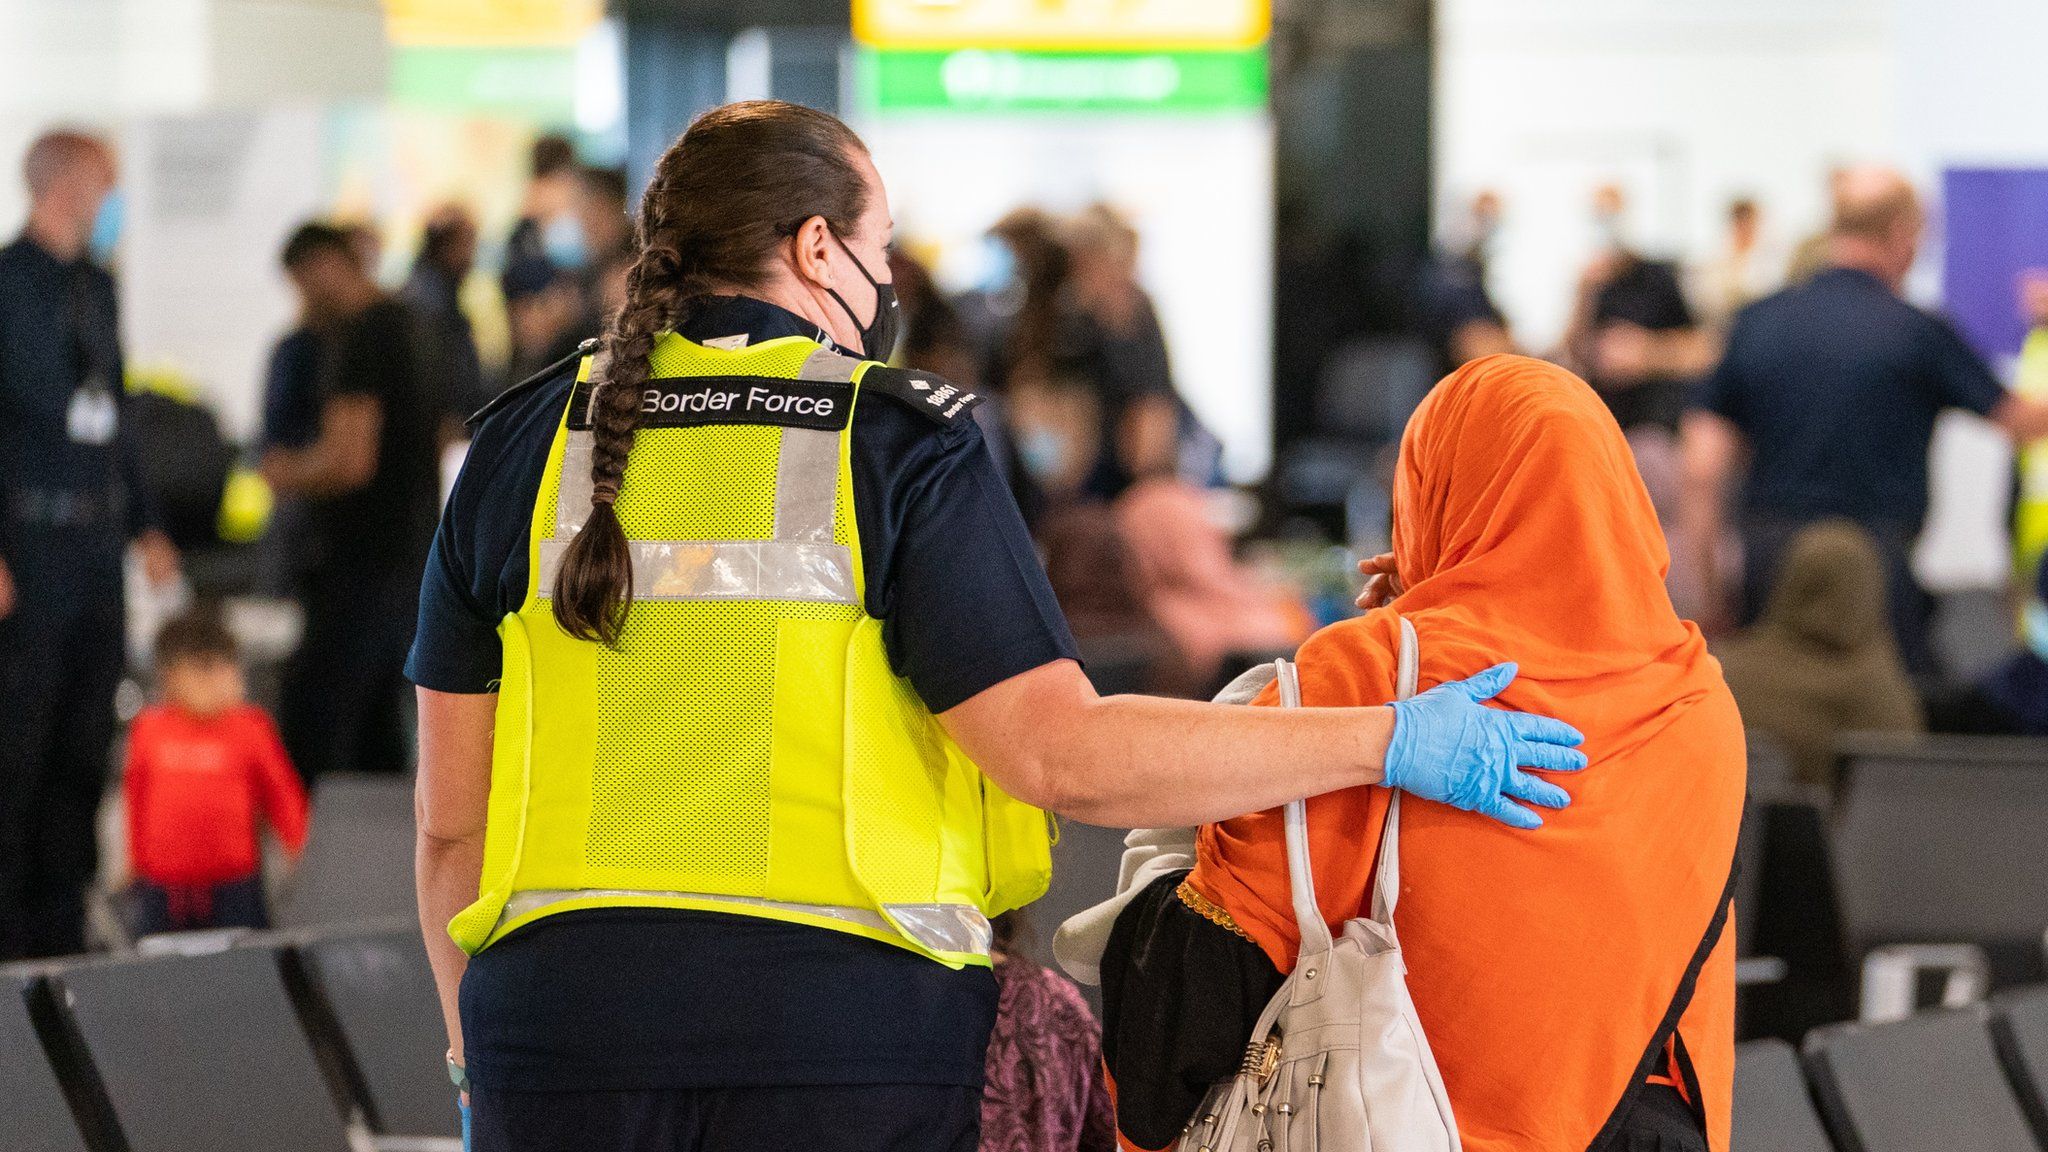 A Border Force official welcomes a refugee